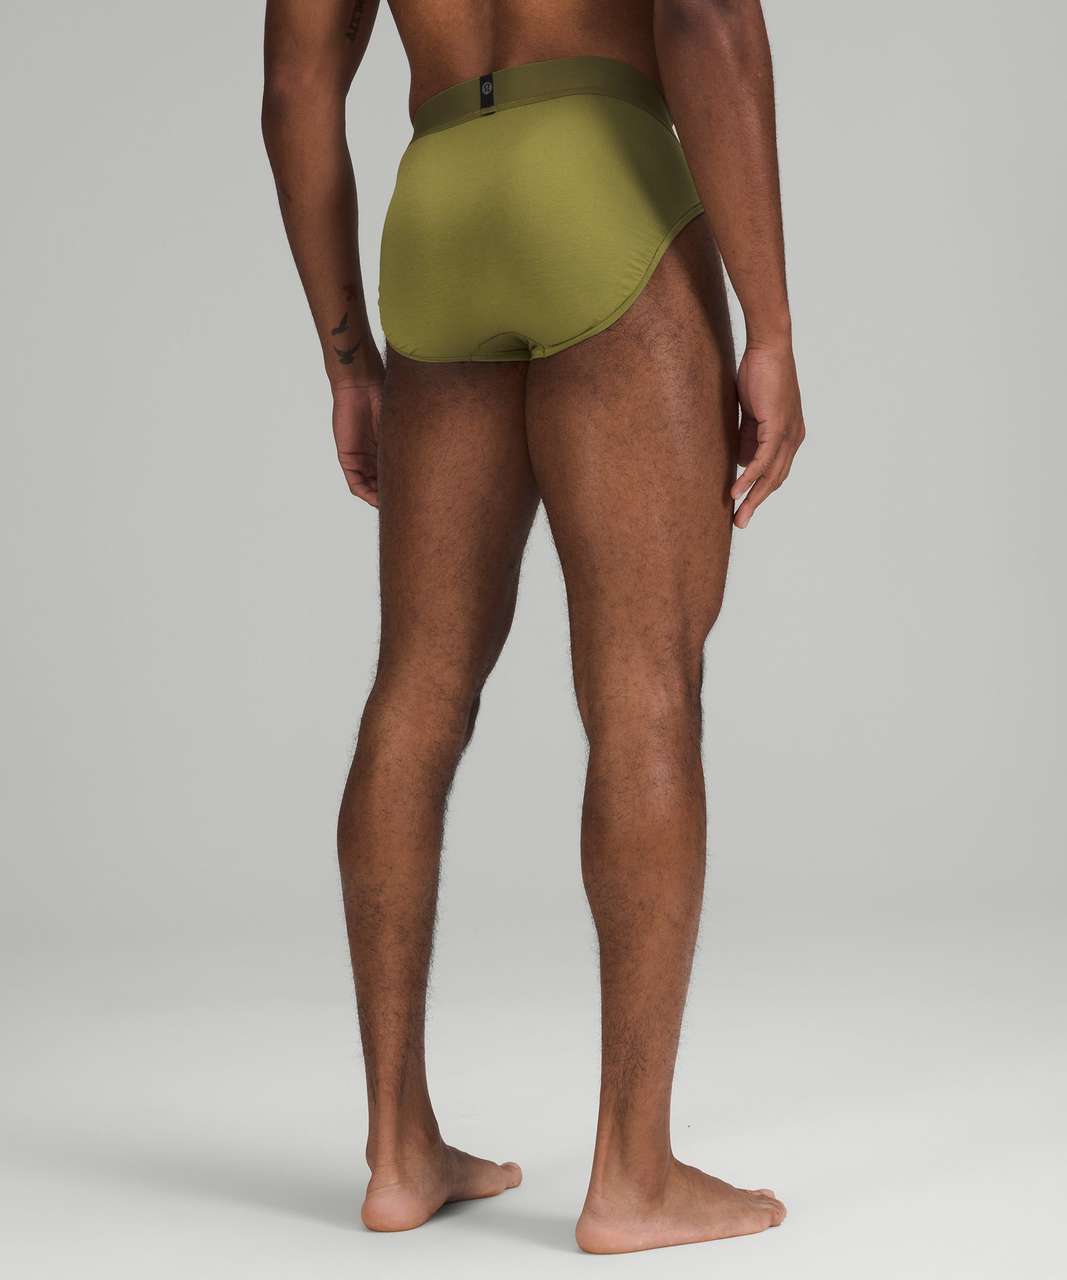 Lululemon Always In Motion Brief with Fly - Bronze Green